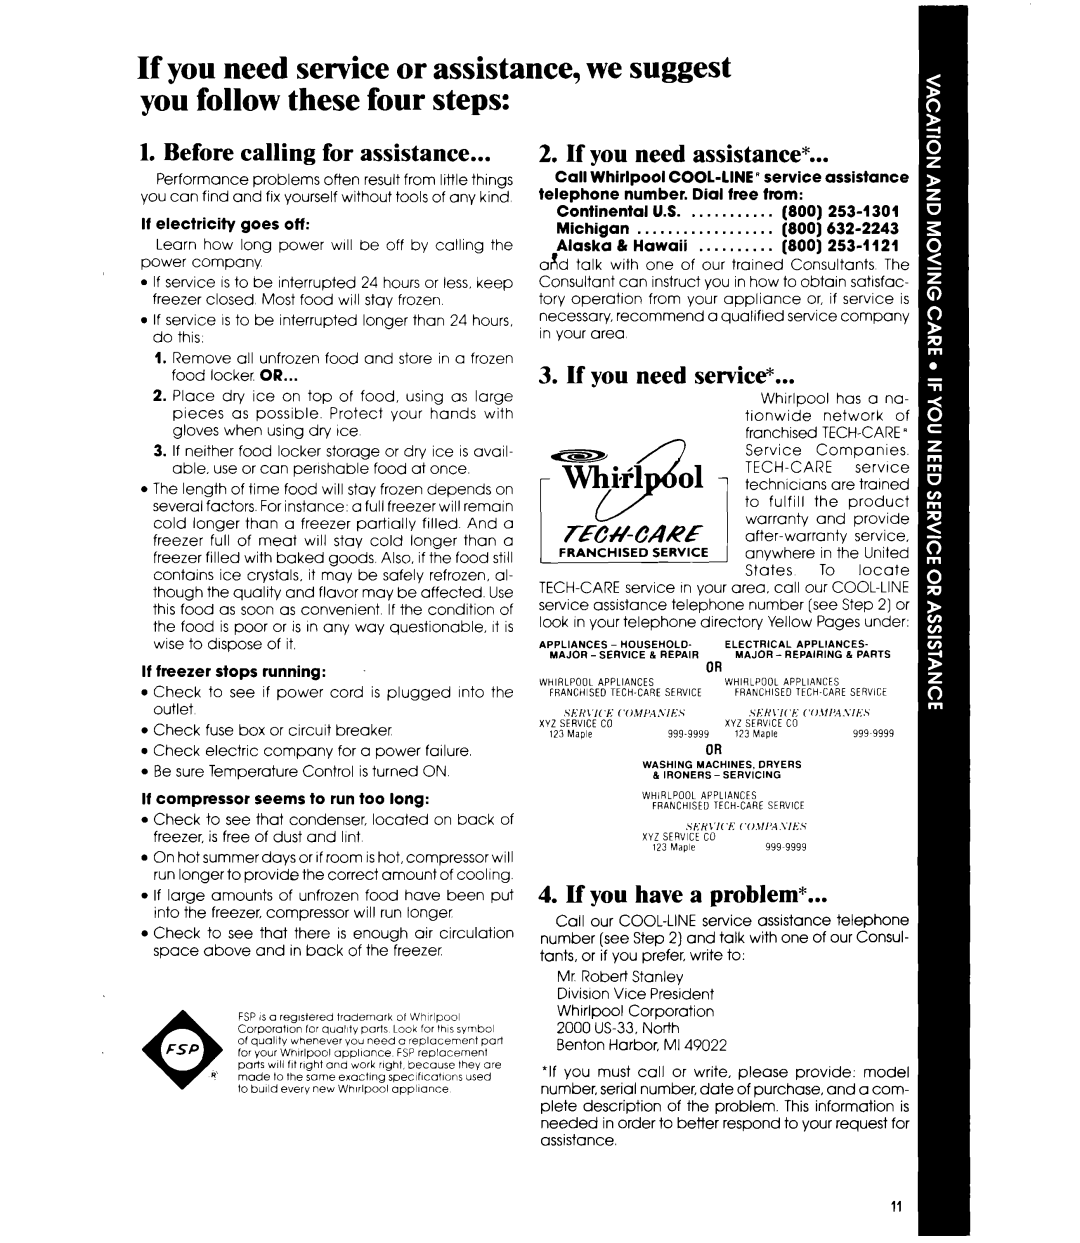 Whirlpool EVZOON manual 7EiMCARE, Before calling for assistance, If you need assistance, lf you need service 